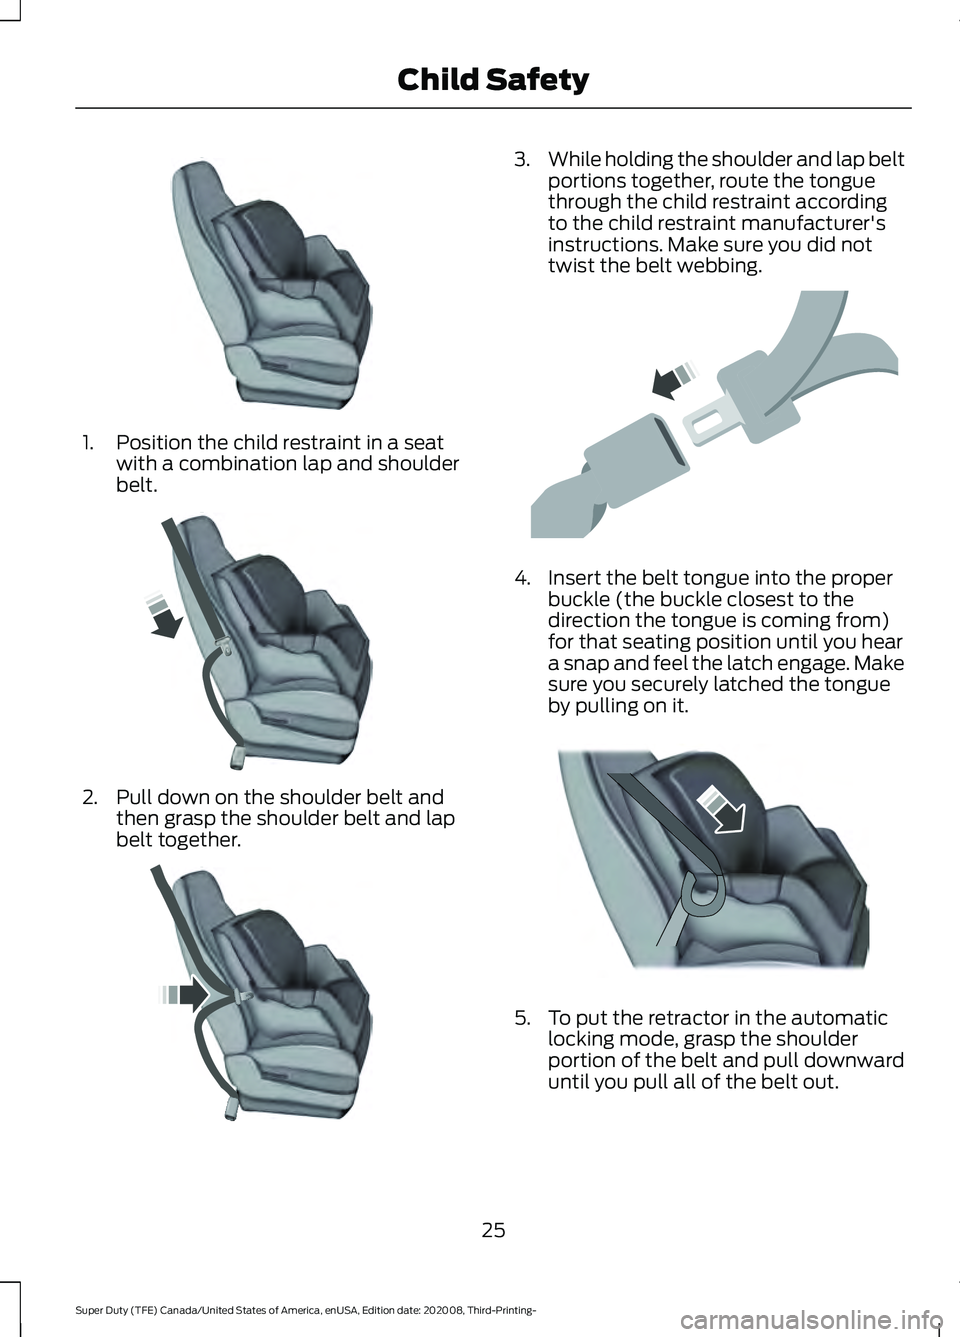 FORD F-600 2021  Owners Manual 1. Position the child restraint in a seat
with a combination lap and shoulder
belt. 2. Pull down on the shoulder belt and
then grasp the shoulder belt and lap
belt together. 3.
While holding the shoul